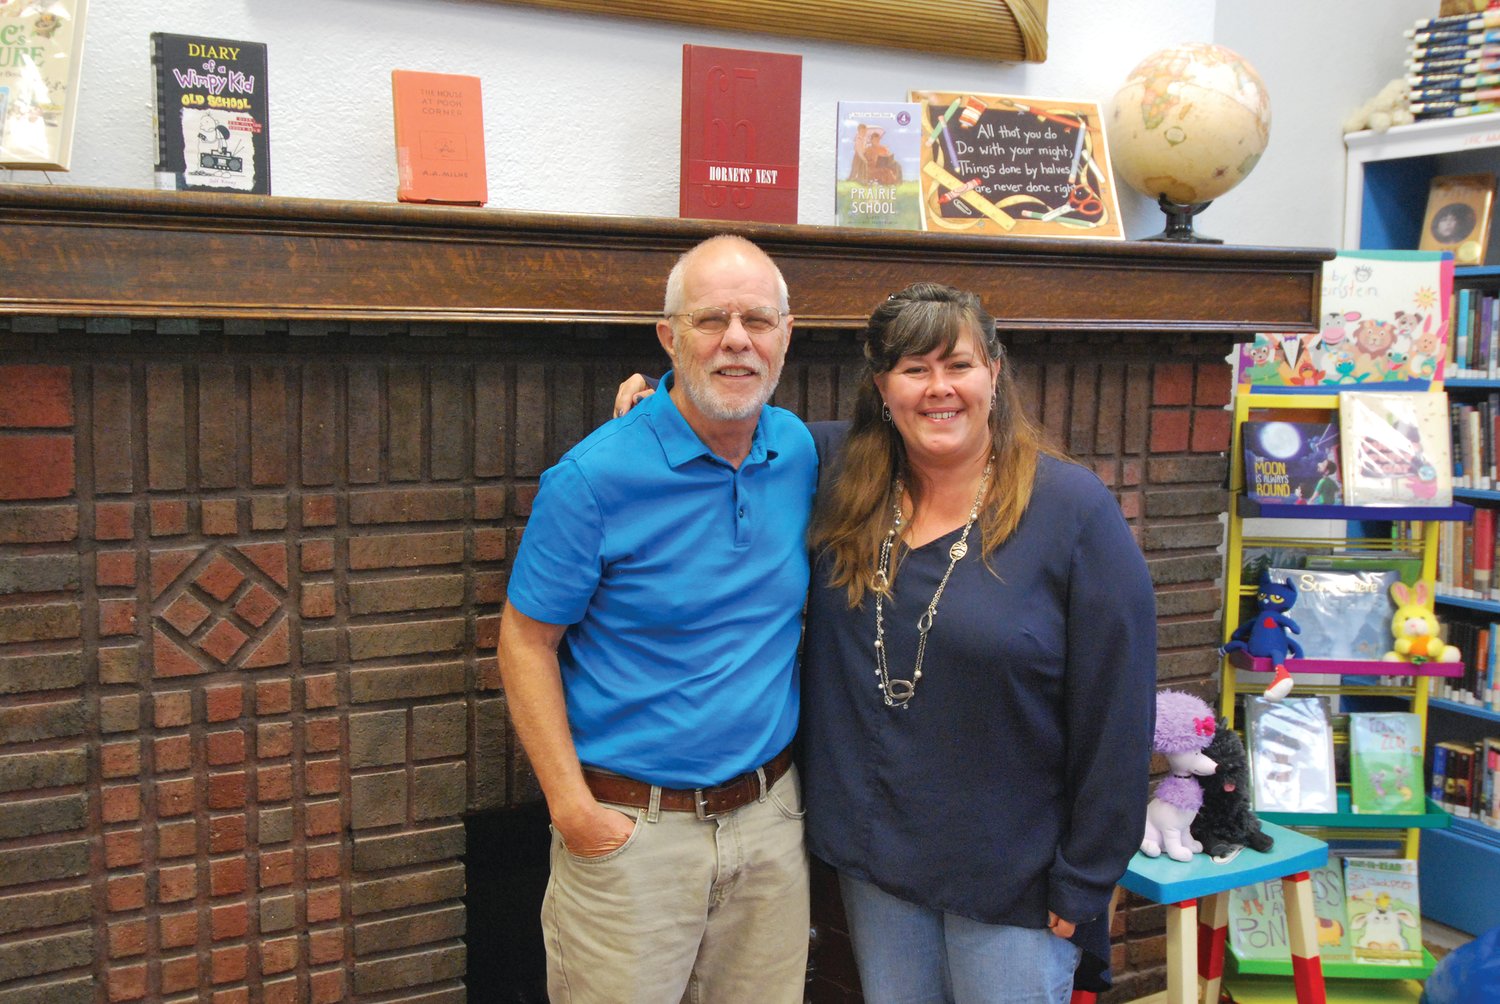 Rick Payne, outgoing director, and Christy Roark, new director, stand in the children’s area of Waveland-Brown Township Public Library. Payne retired this week after more than 10 years overseeing the library.